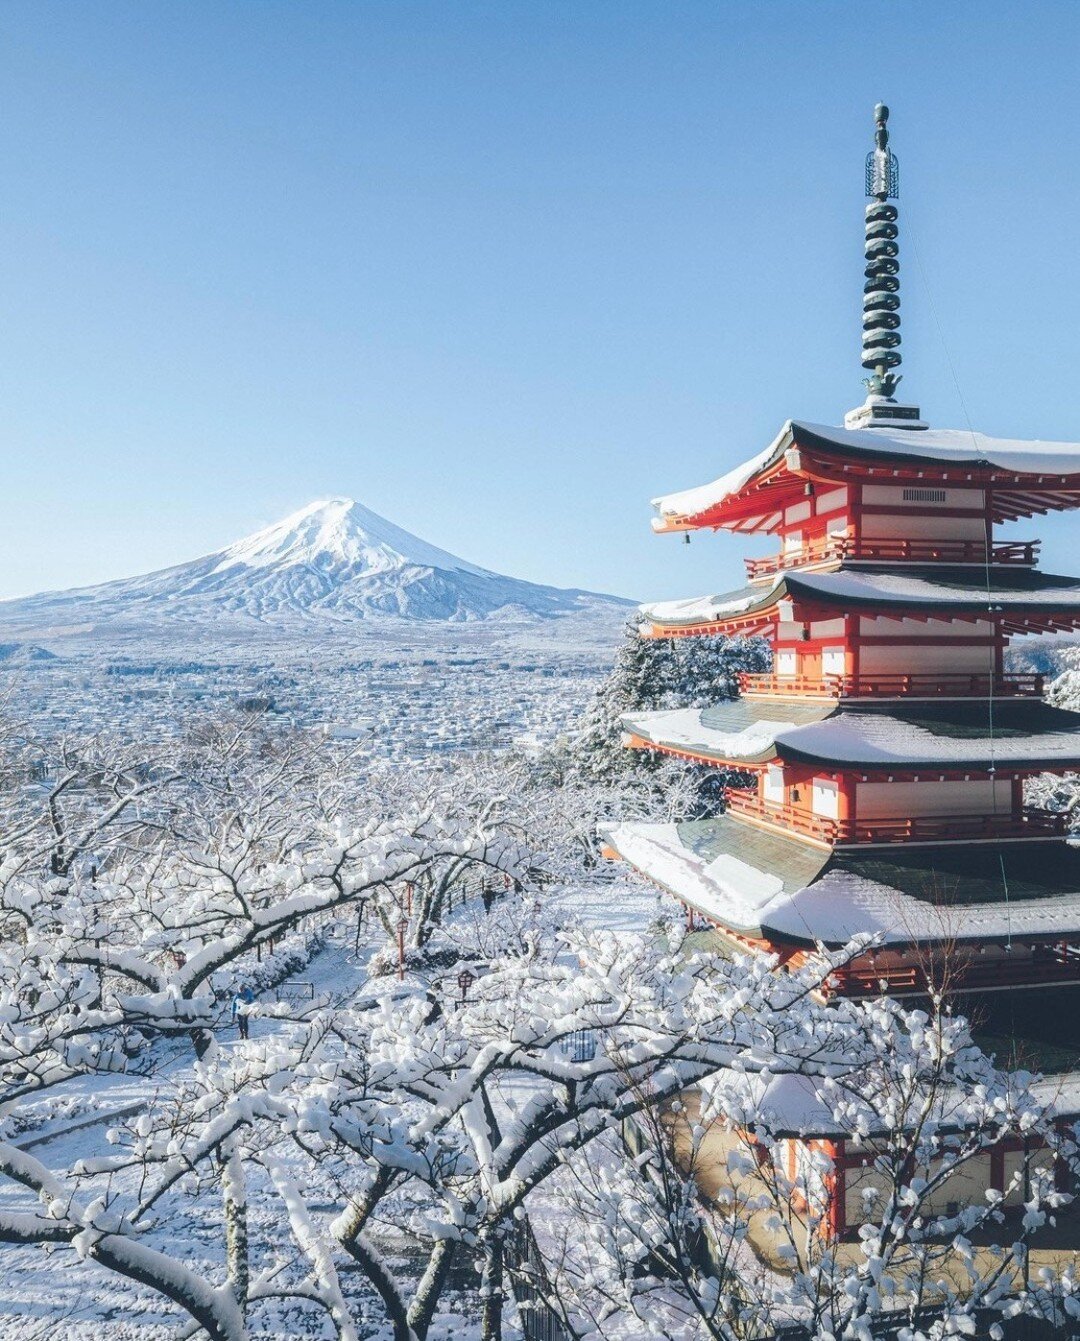 🗻 Beneath its wintry finery, Mount Fuji silently recounts its past, a solemn silhouette that spans the ages. ❄️

➡️ Breizh Café in Japan: Tokyo (Kagurazaka, Omotesando and Shinjuku), Kyoto, Yo